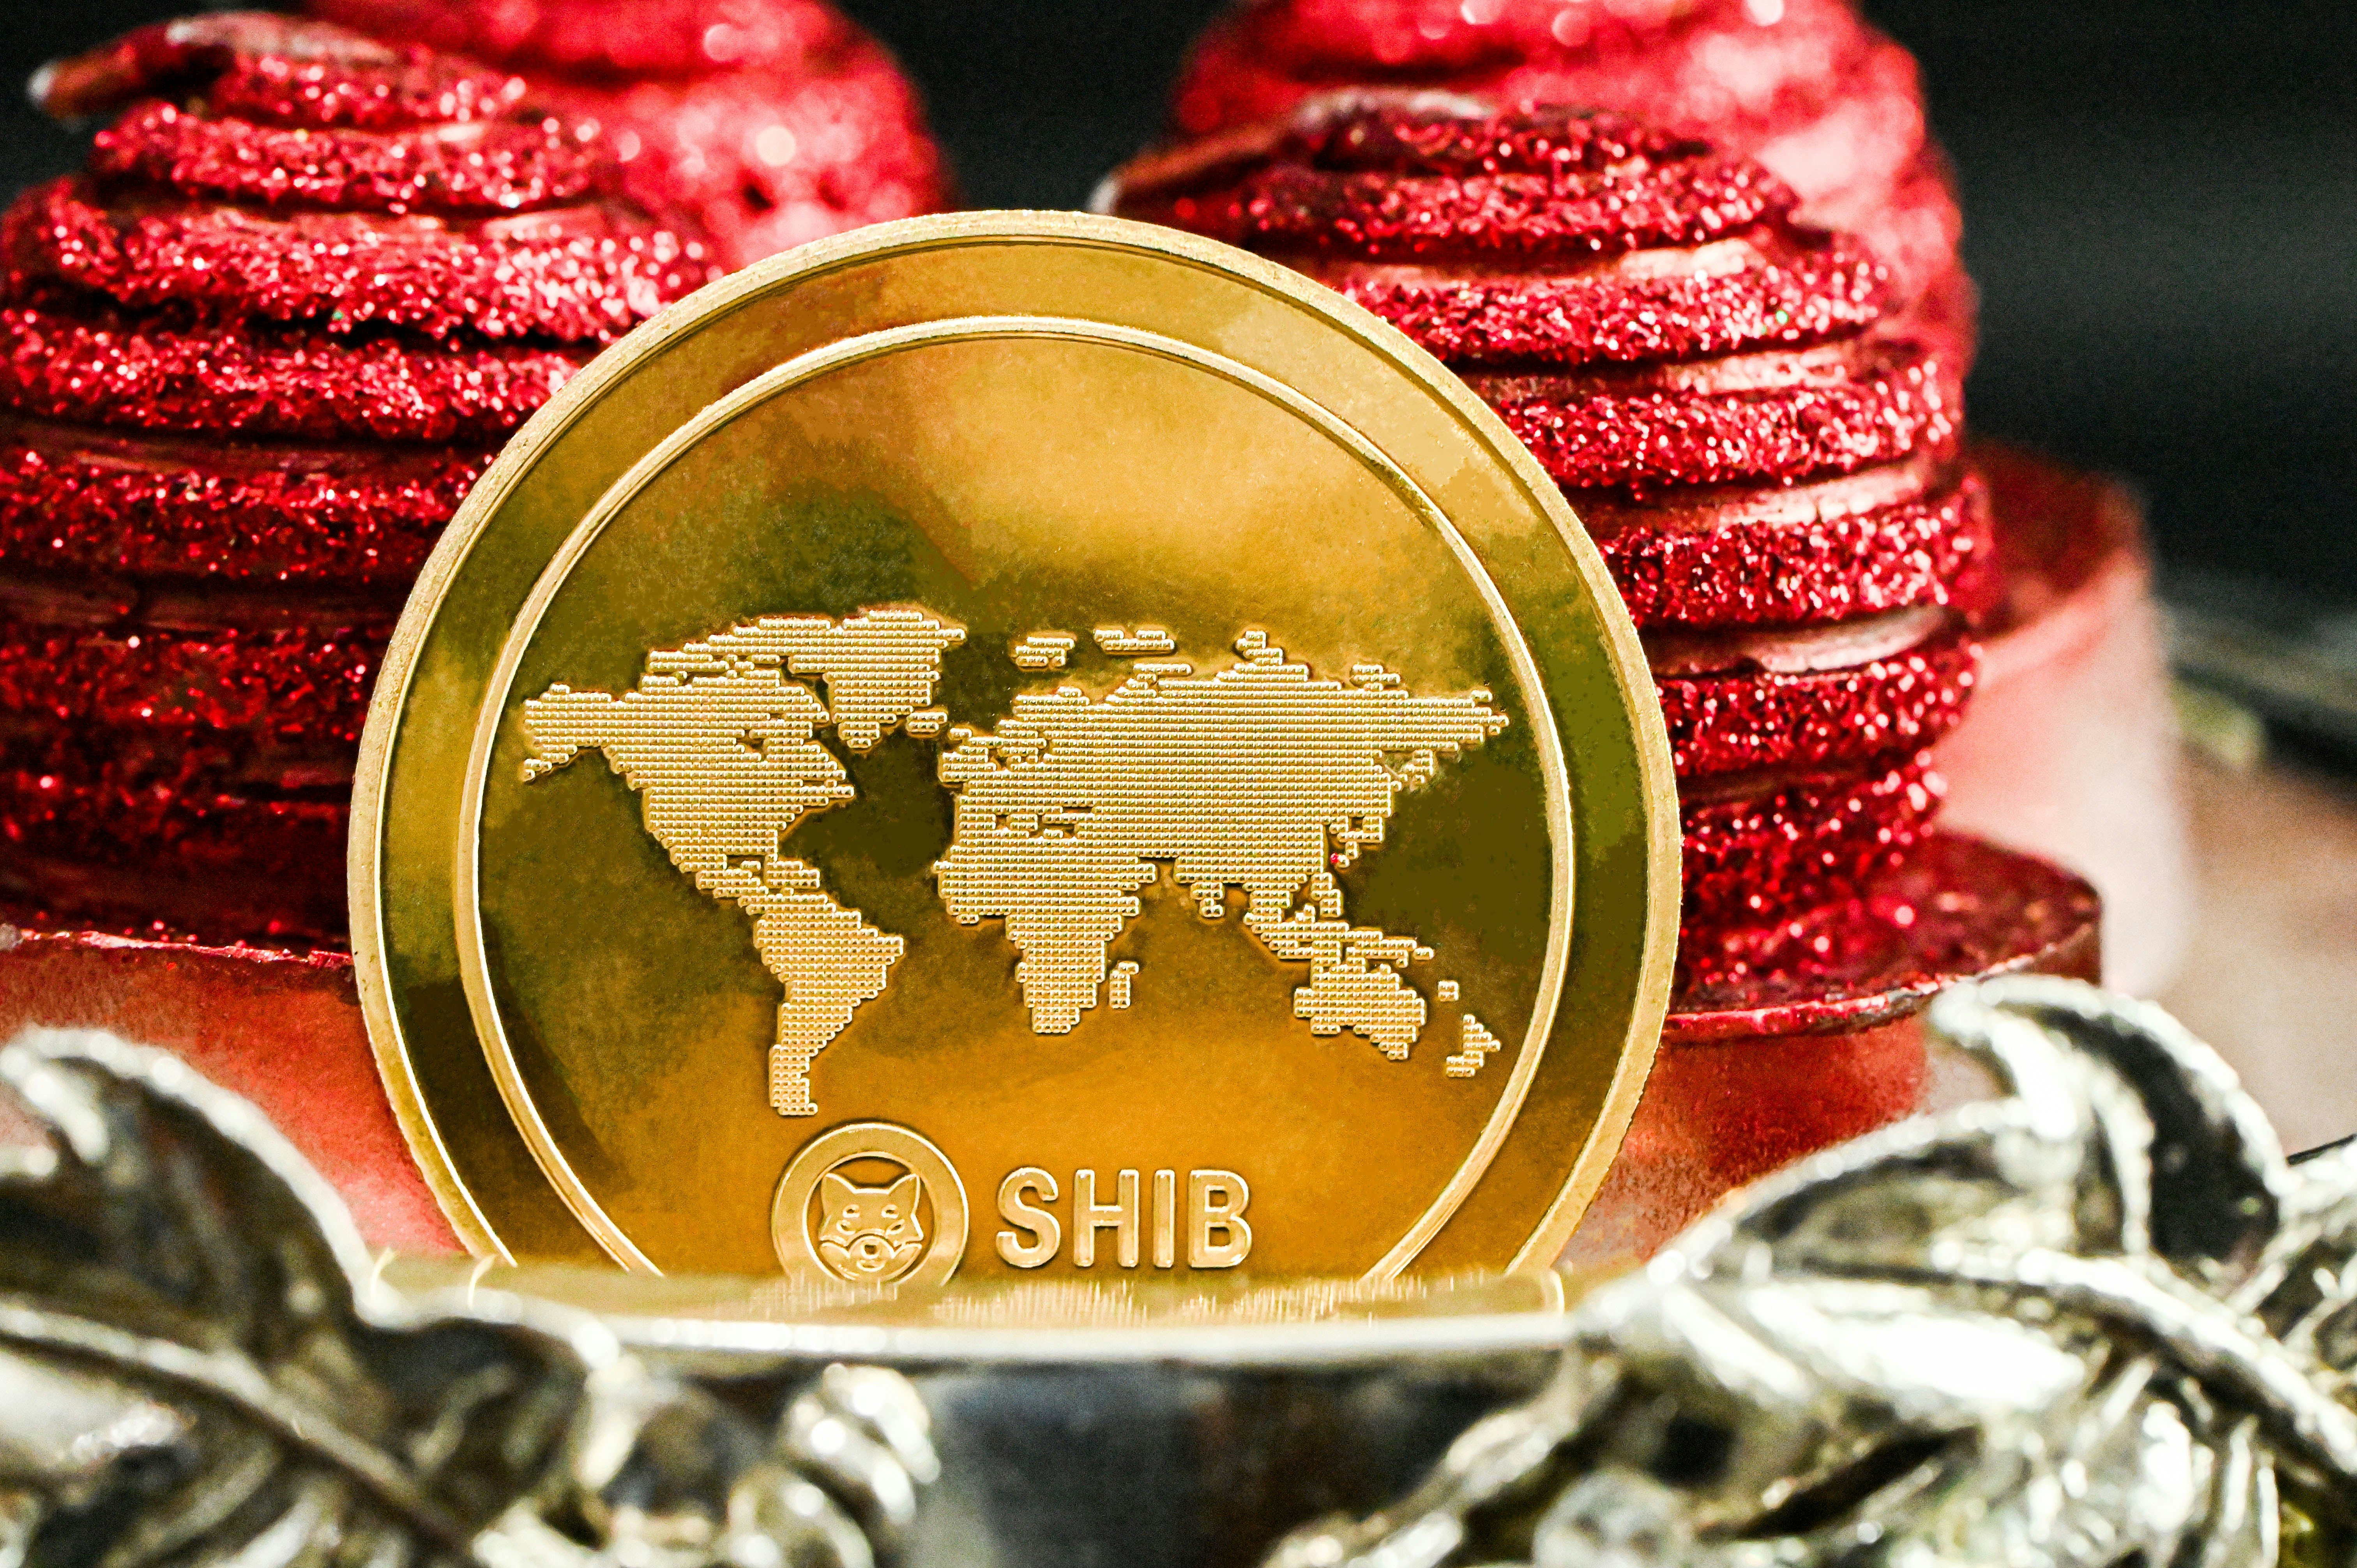 A SHIB coin stands in front of the red balls